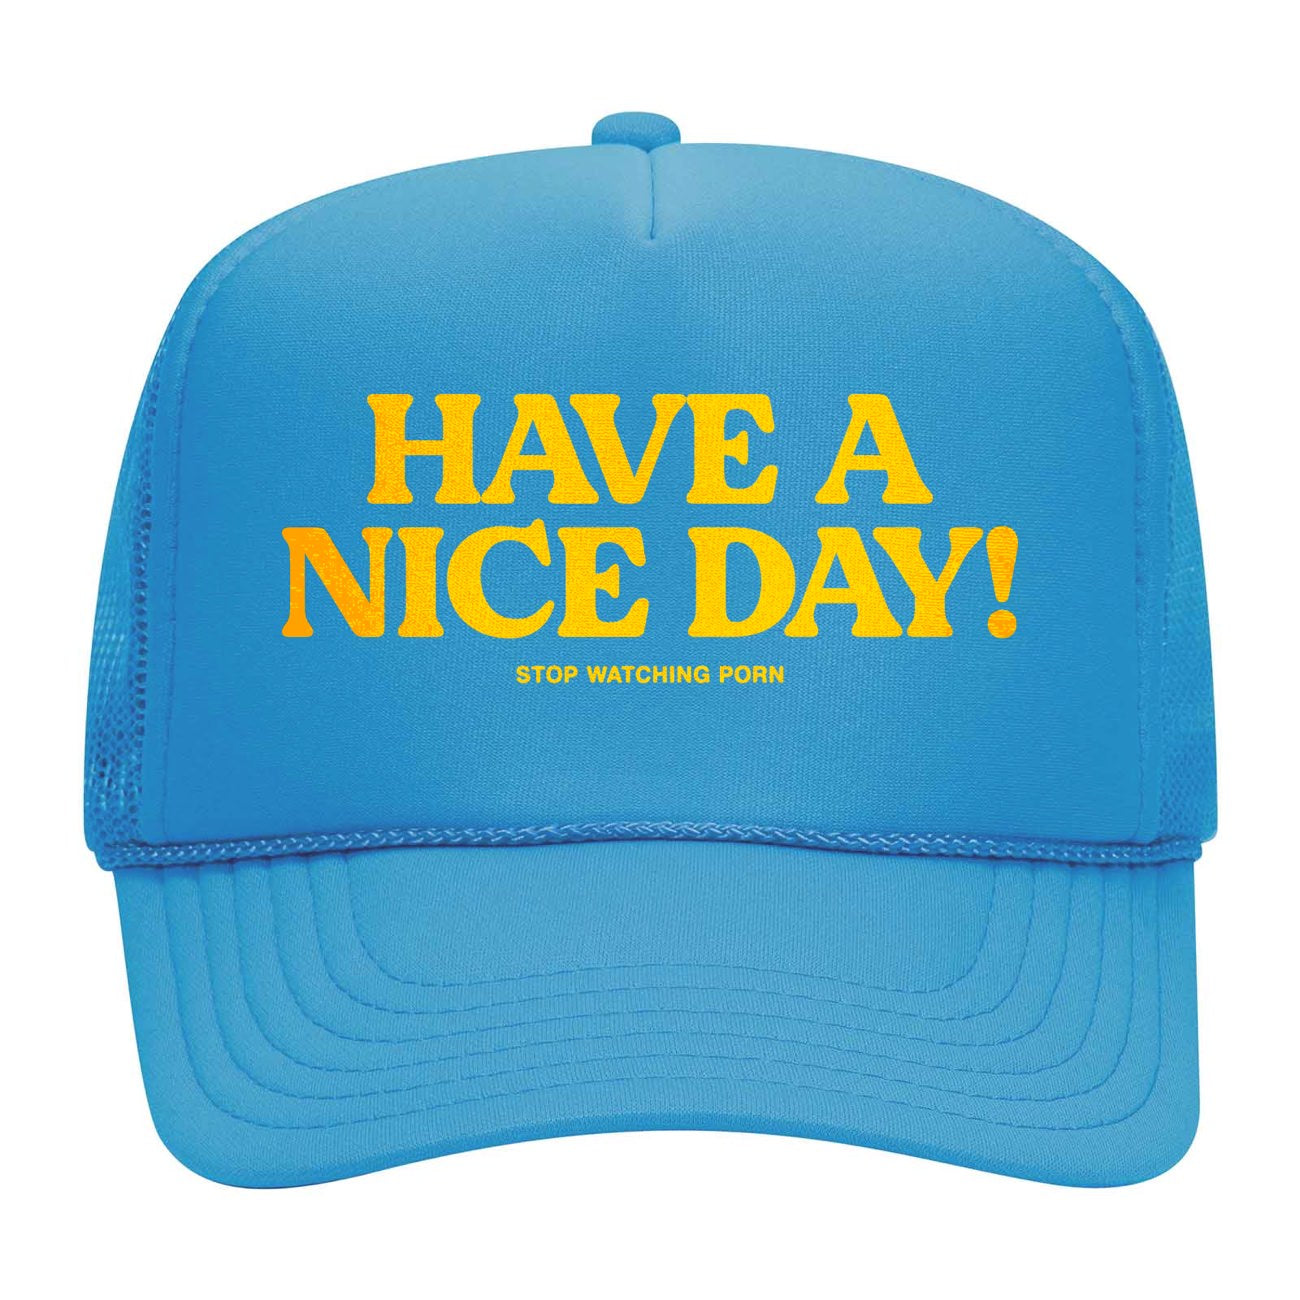 Have A Nice Day Trucker Hat - Blue